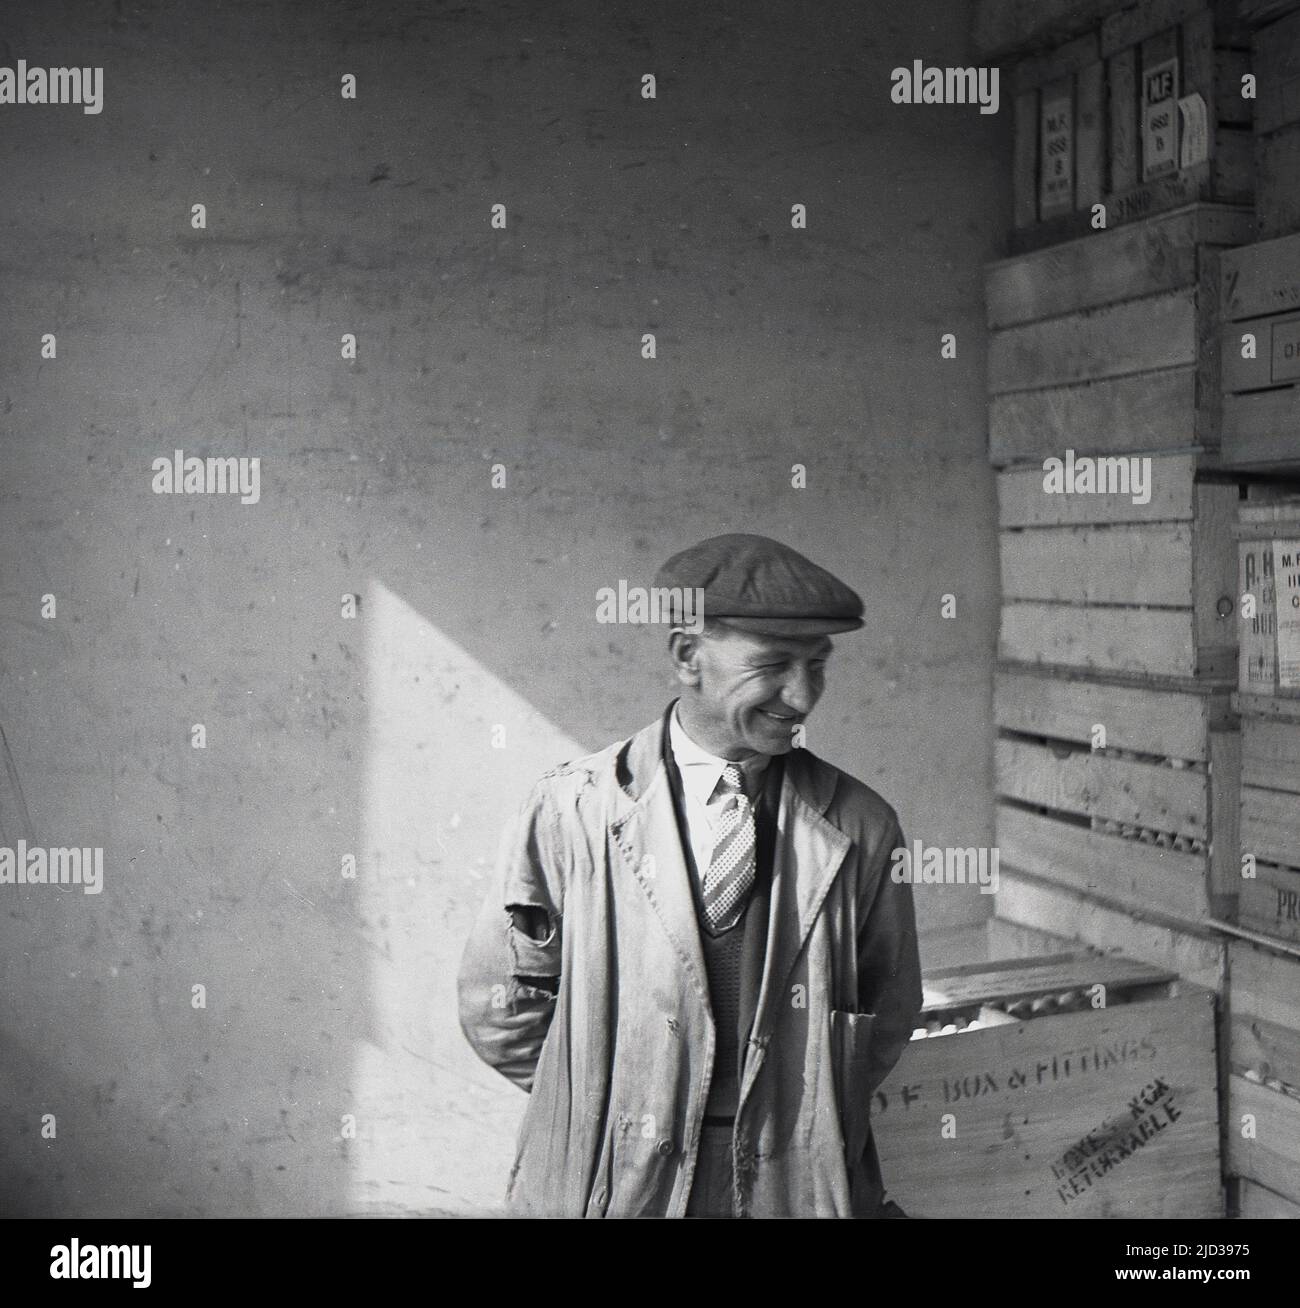 1940s, historical, a male shop/warehouse worker smiling, wearing shirt and tie underneath tatty work overall or coat - full of holes - and a cloth cap, standing for a photo inside, beside a stack of wooden crates, Bramshall, Stockport, Manchester, England, UK. Stock Photo